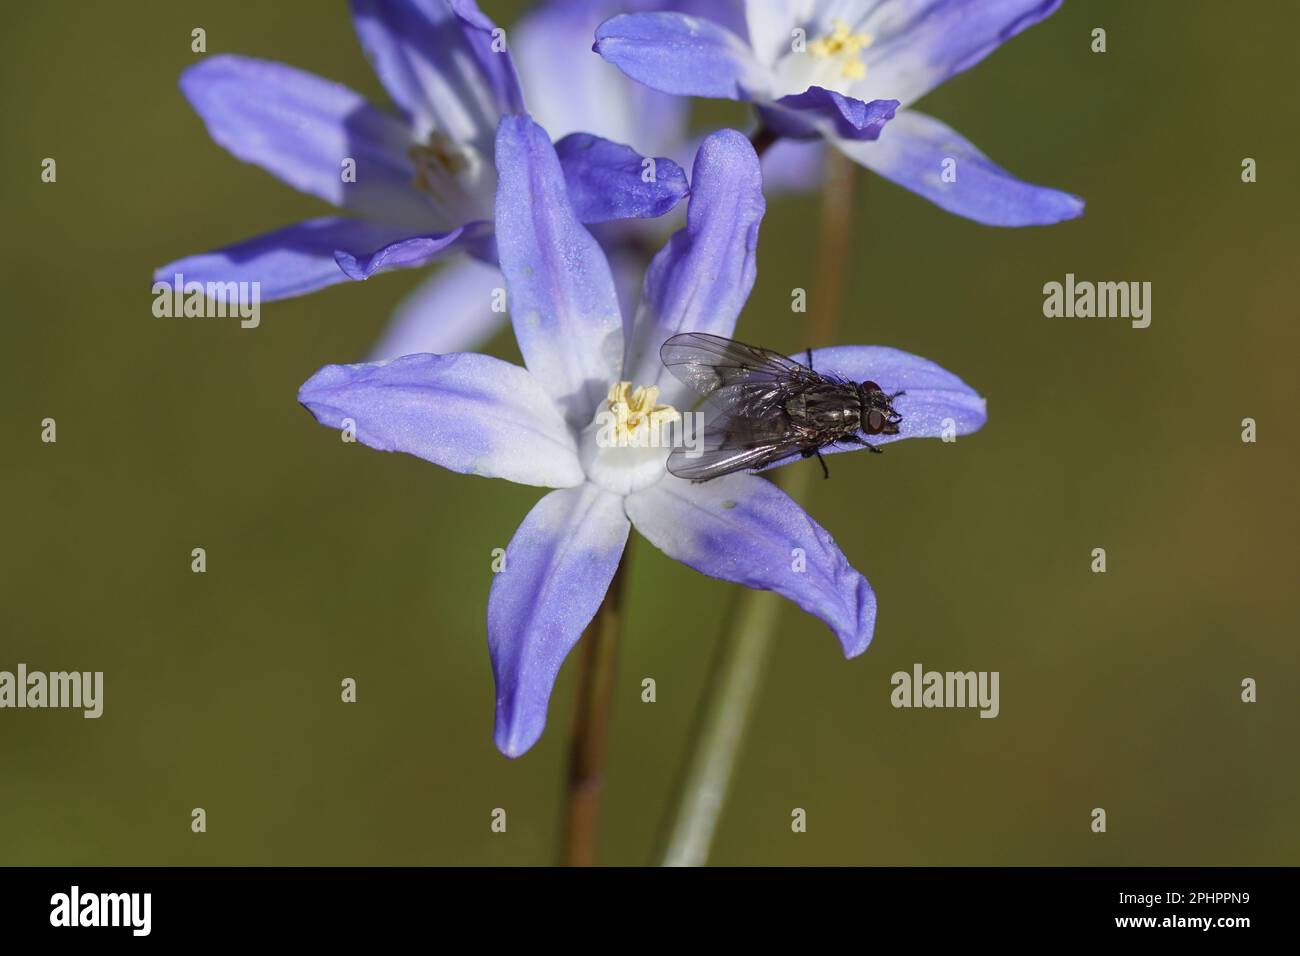 Closeup of the fly Helina evecta, family House flies, Muscidae. On a flower of Glory of the Snow (Chionodoxa luciliae), subfamily Scilloideae, Stock Photo